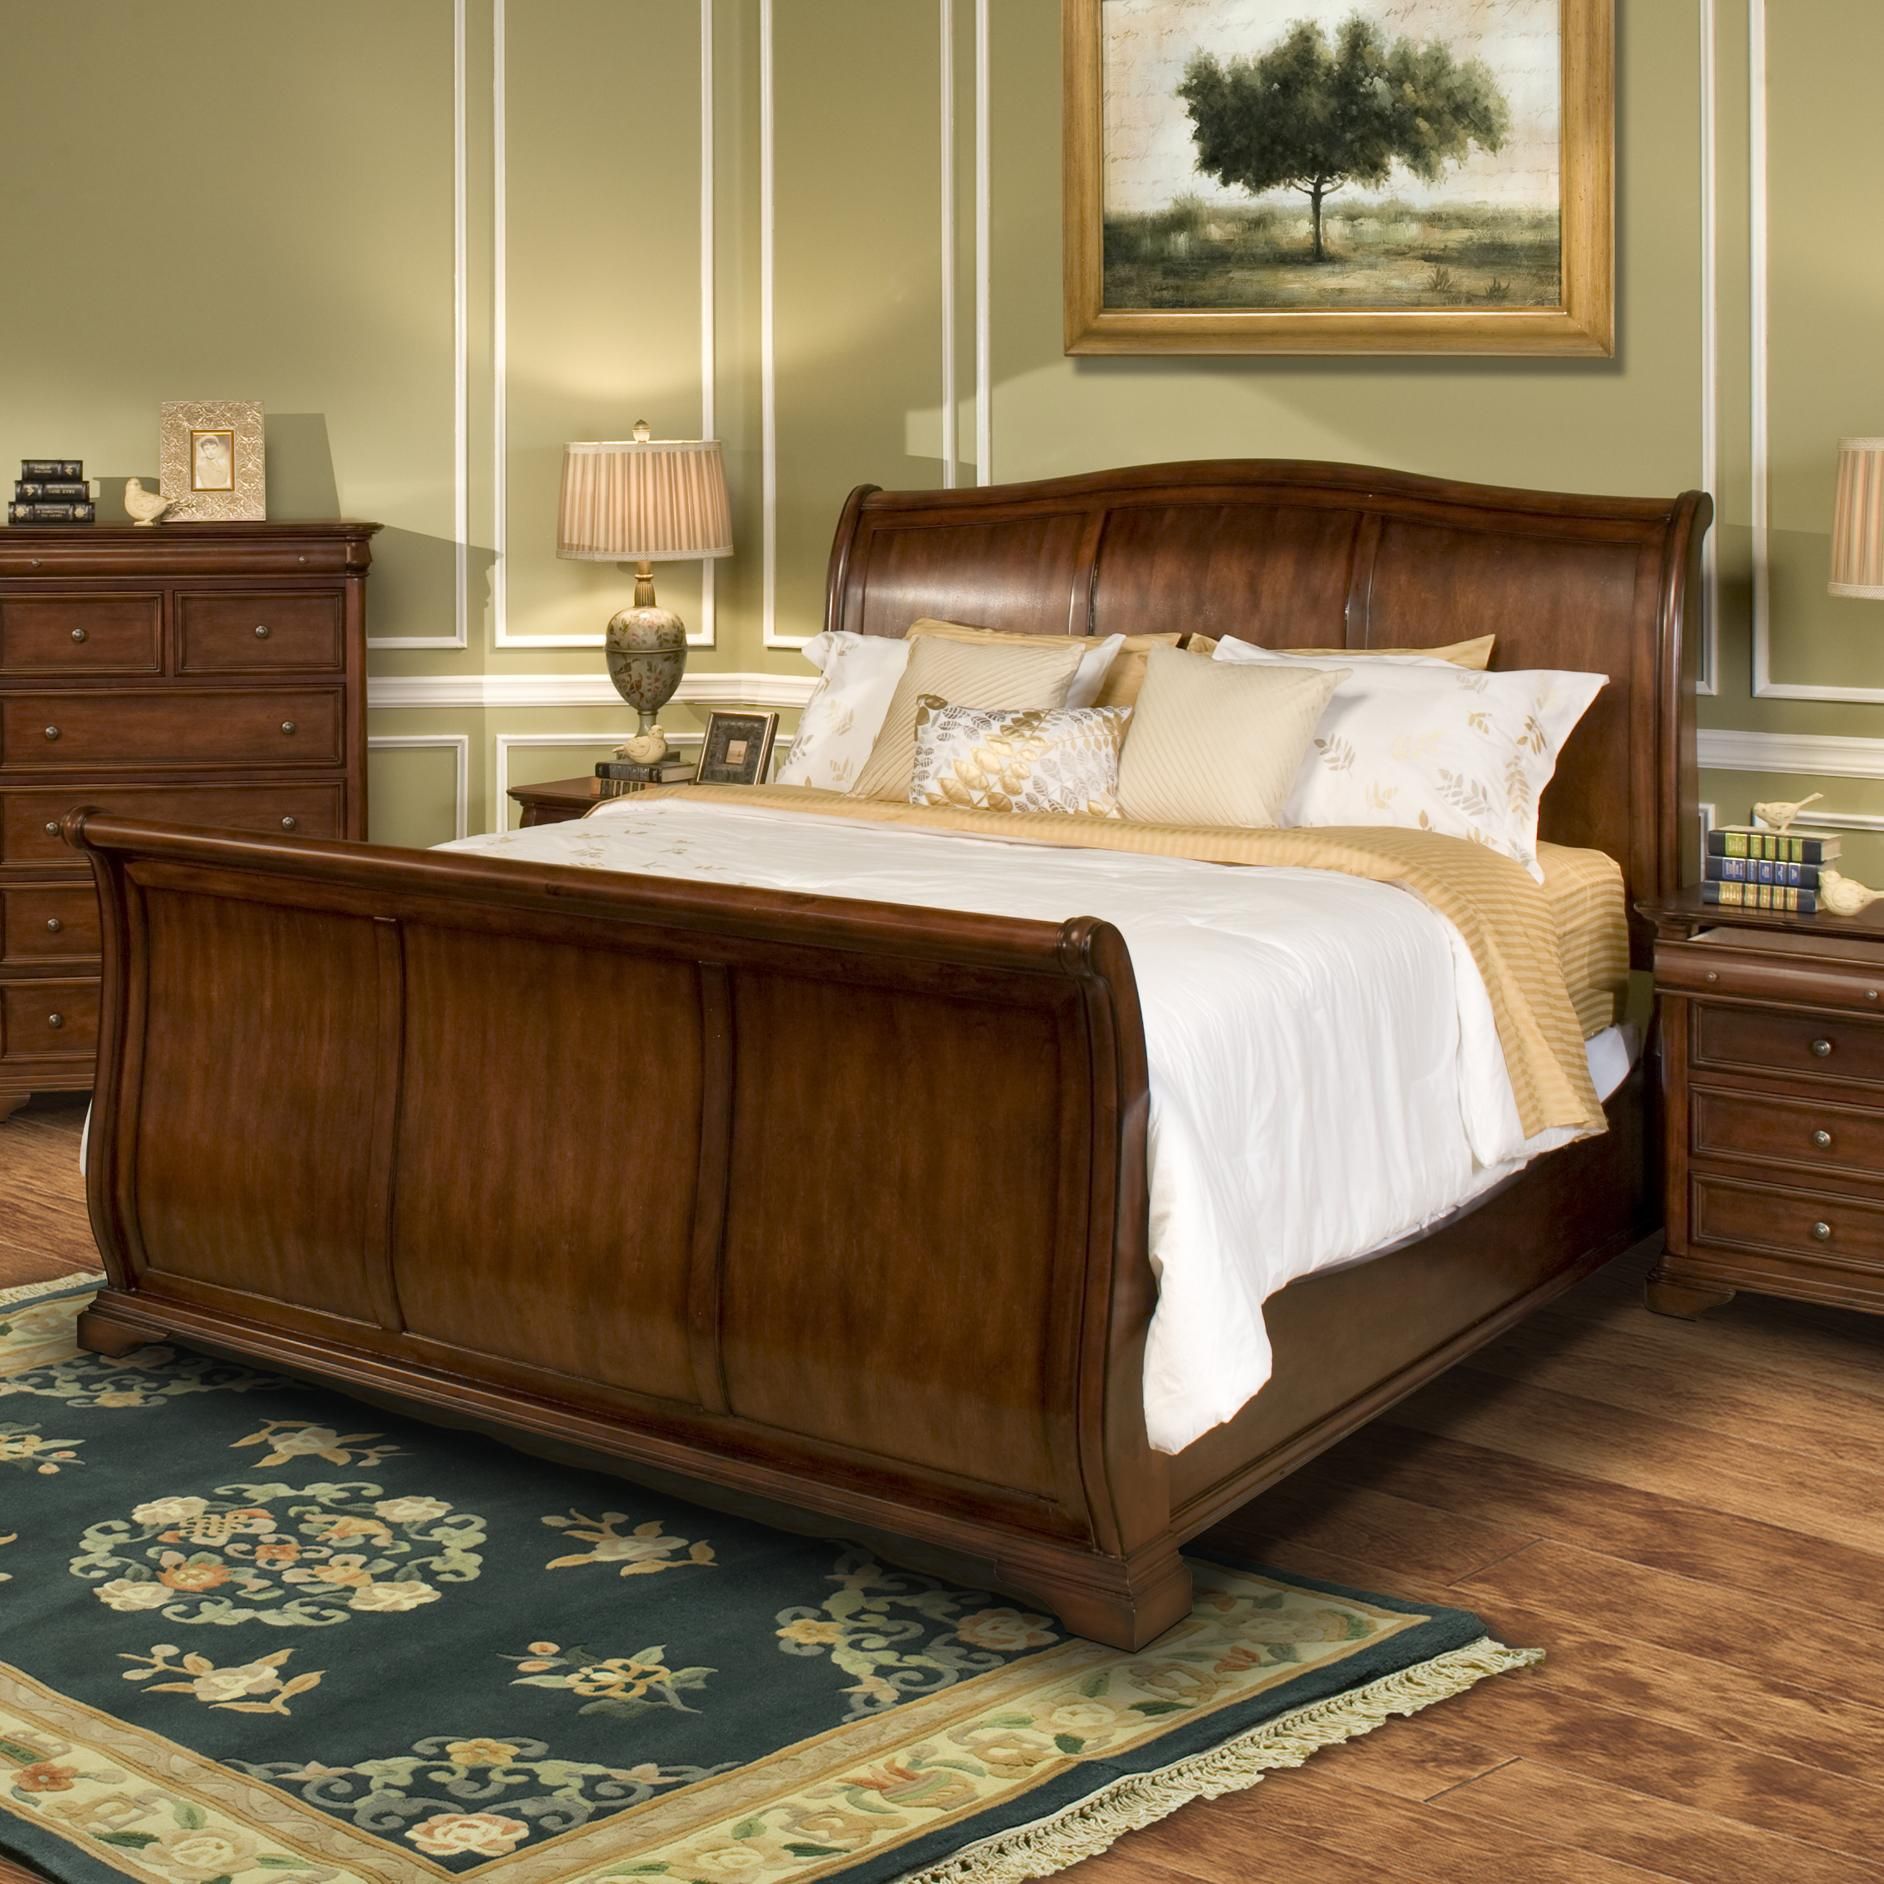 Whitley Court King Sleigh Bed by New Classic ...